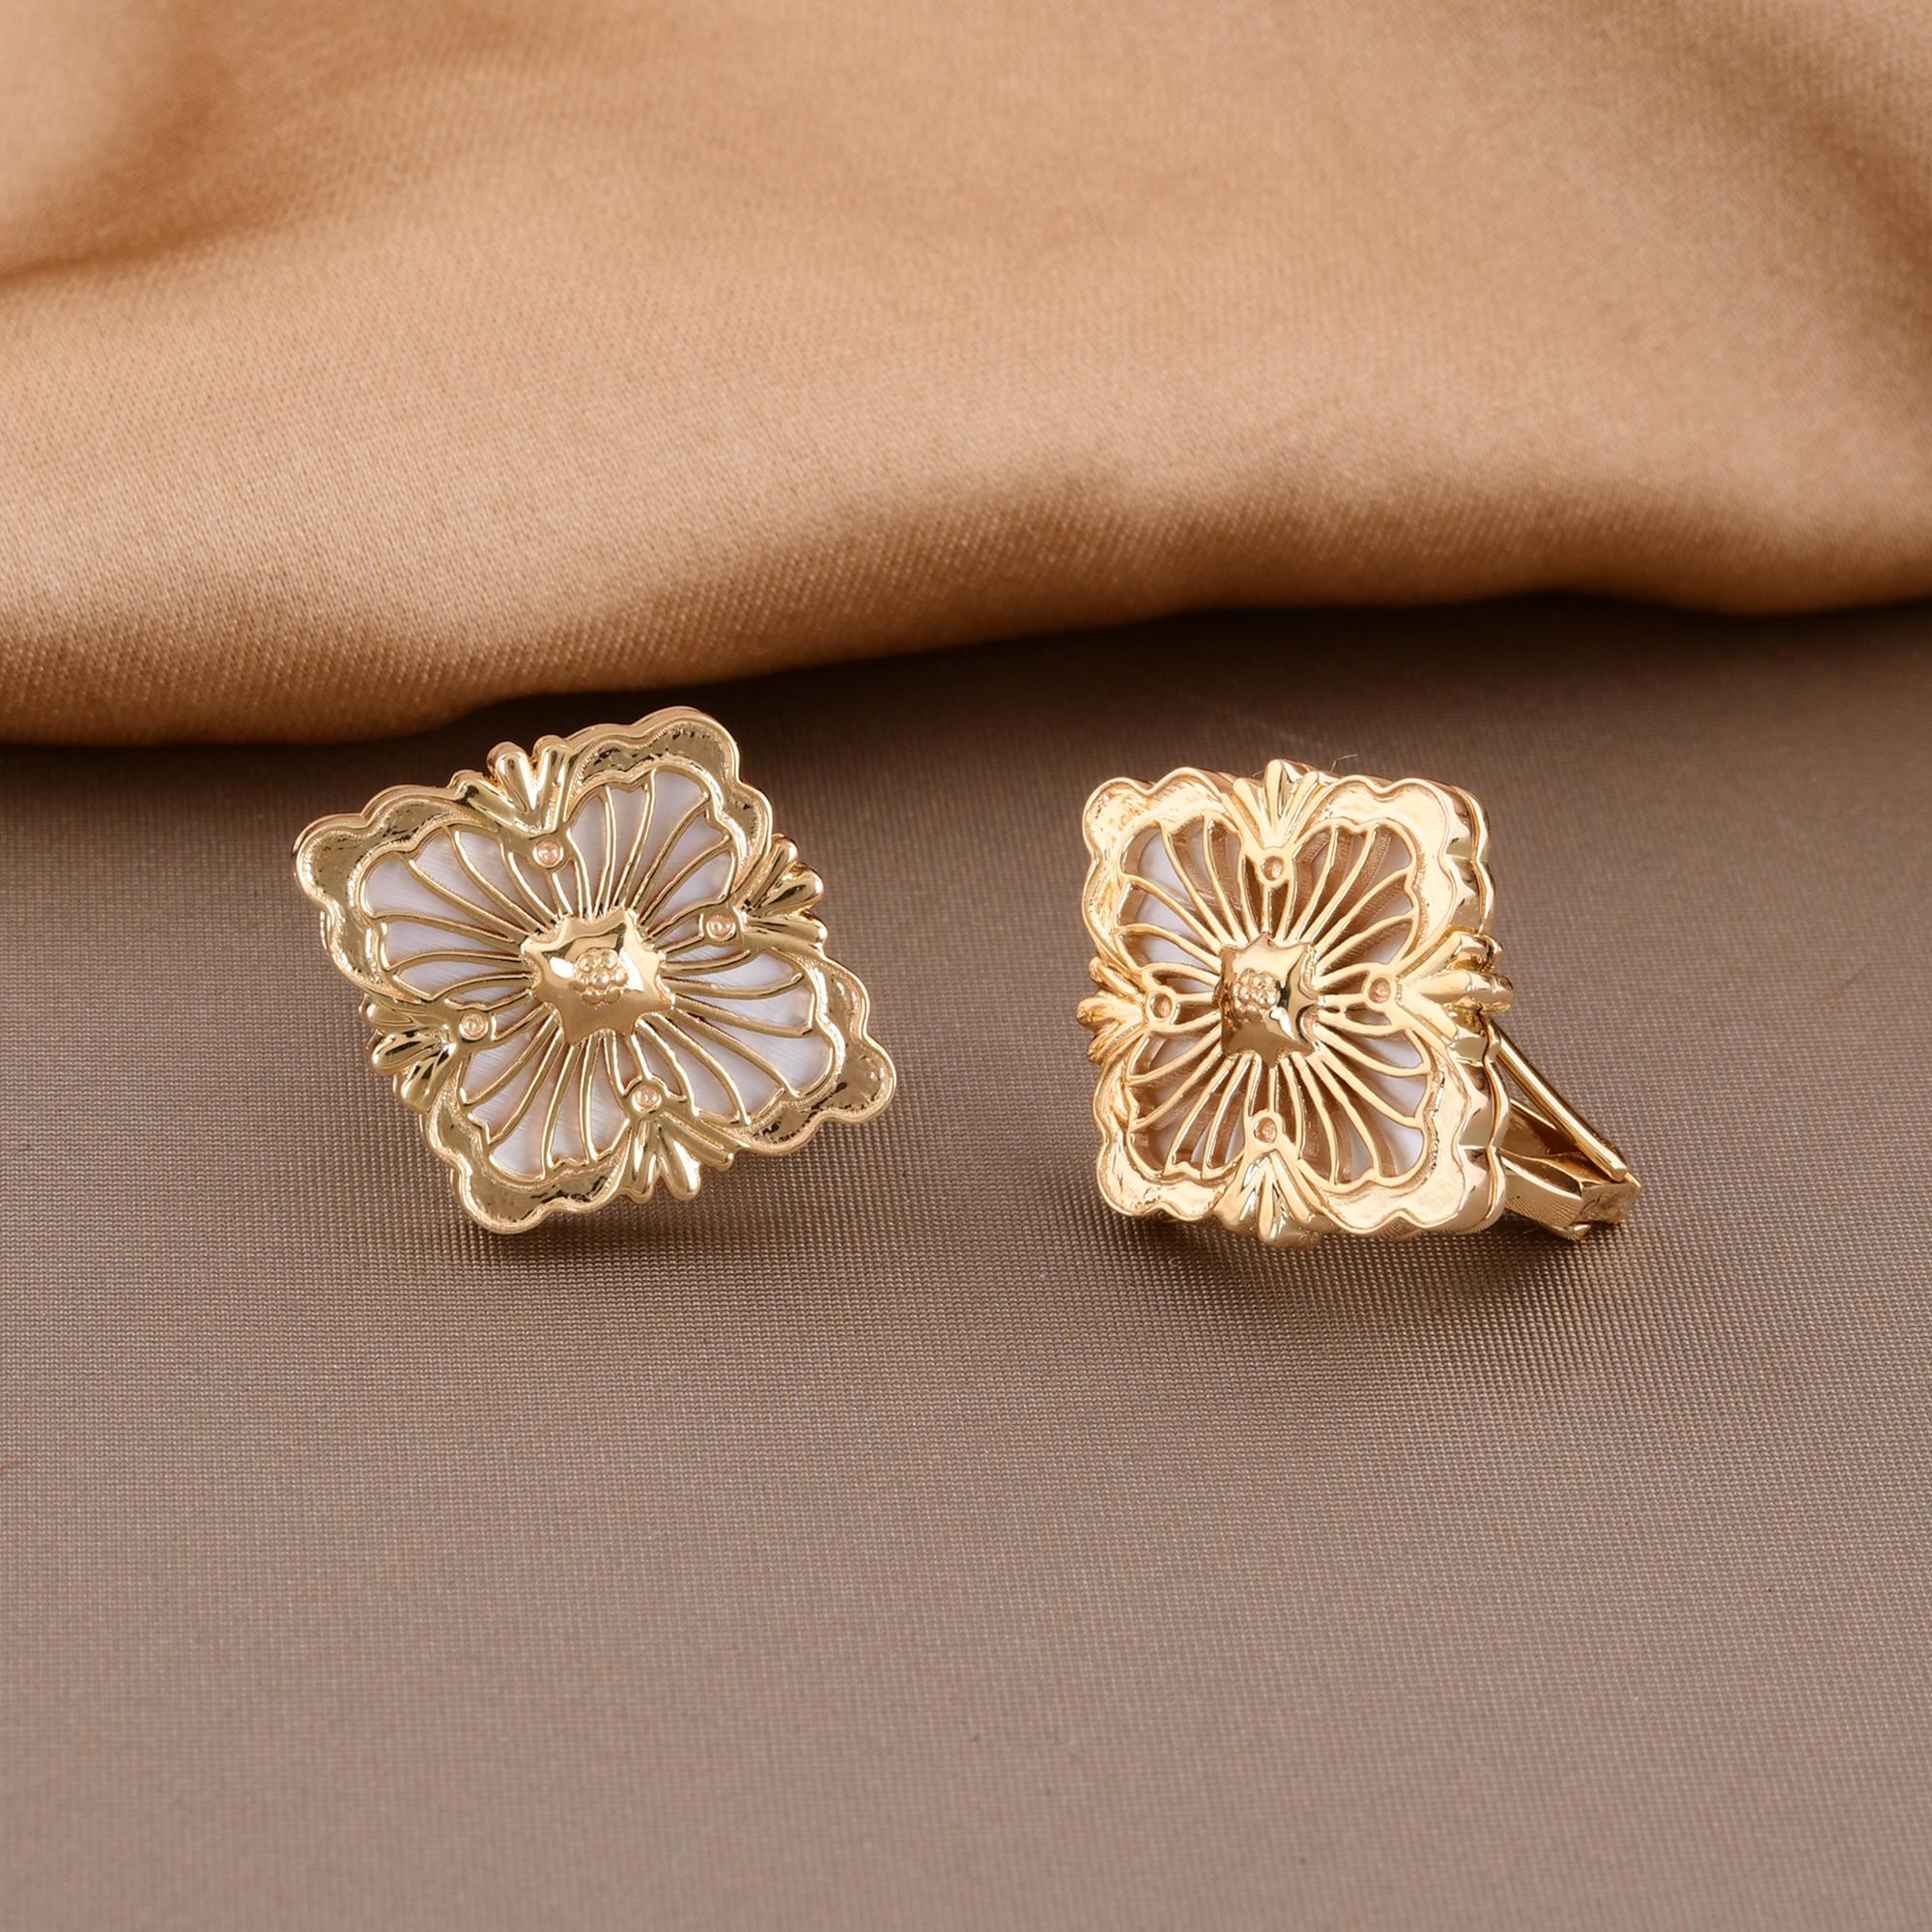 Item Code :- SEE-14636
Gross Wt. :- 10.92 gm
18k Yellow Gold Wt. :- 10.26 gm
Mother Of Pearl Wt. :- 3.31 Ct.
Earrings Size :- 18 mm approx.

✦ Sizing
.....................
We can adjust most items to fit your sizing preferences. Most items can be